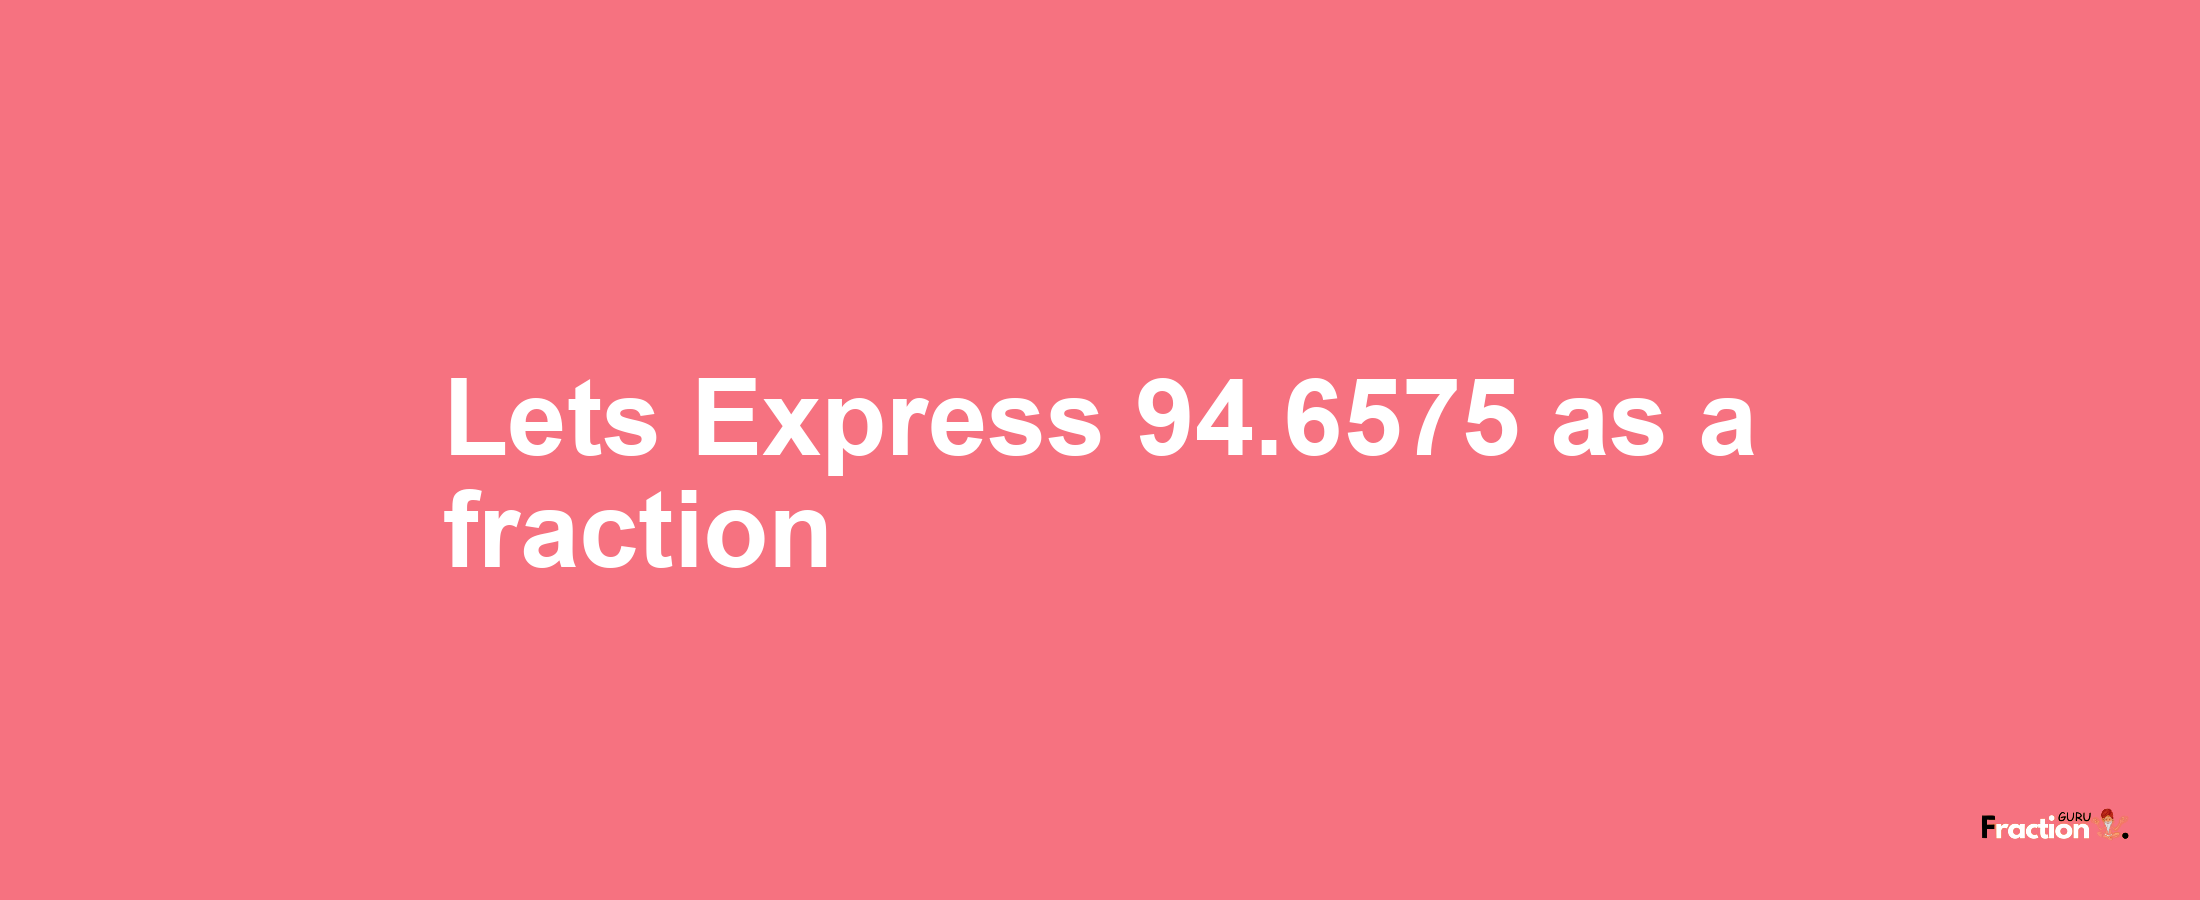 Lets Express 94.6575 as afraction